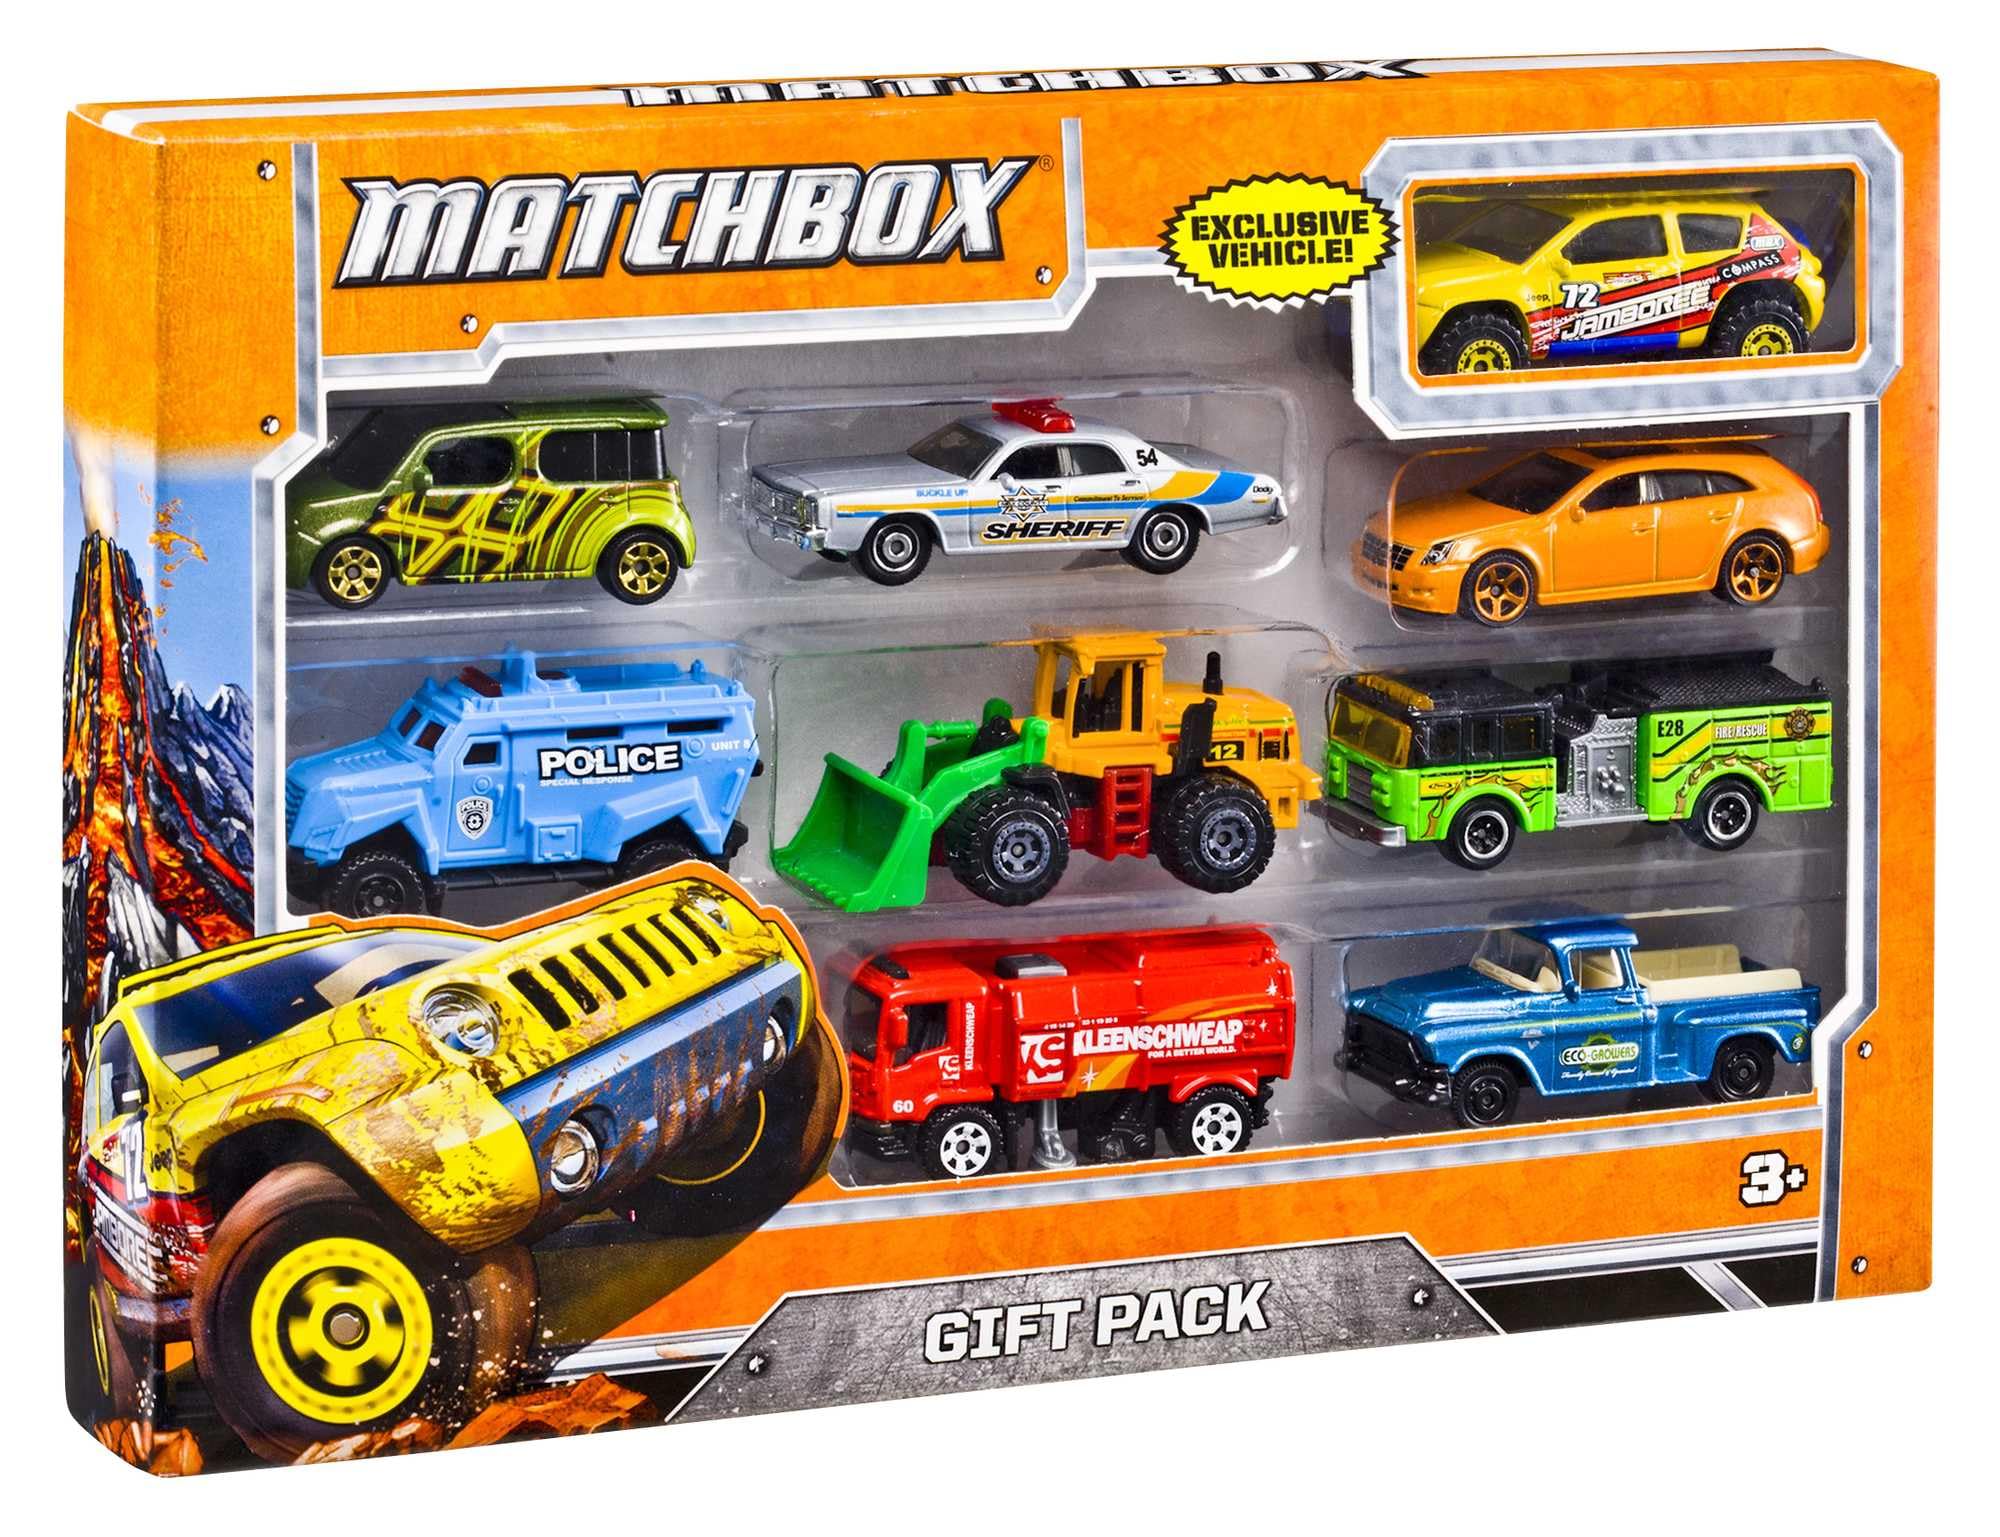 $6.49 (Prime Members): 9-Pack Matchbox Toy Car Collection